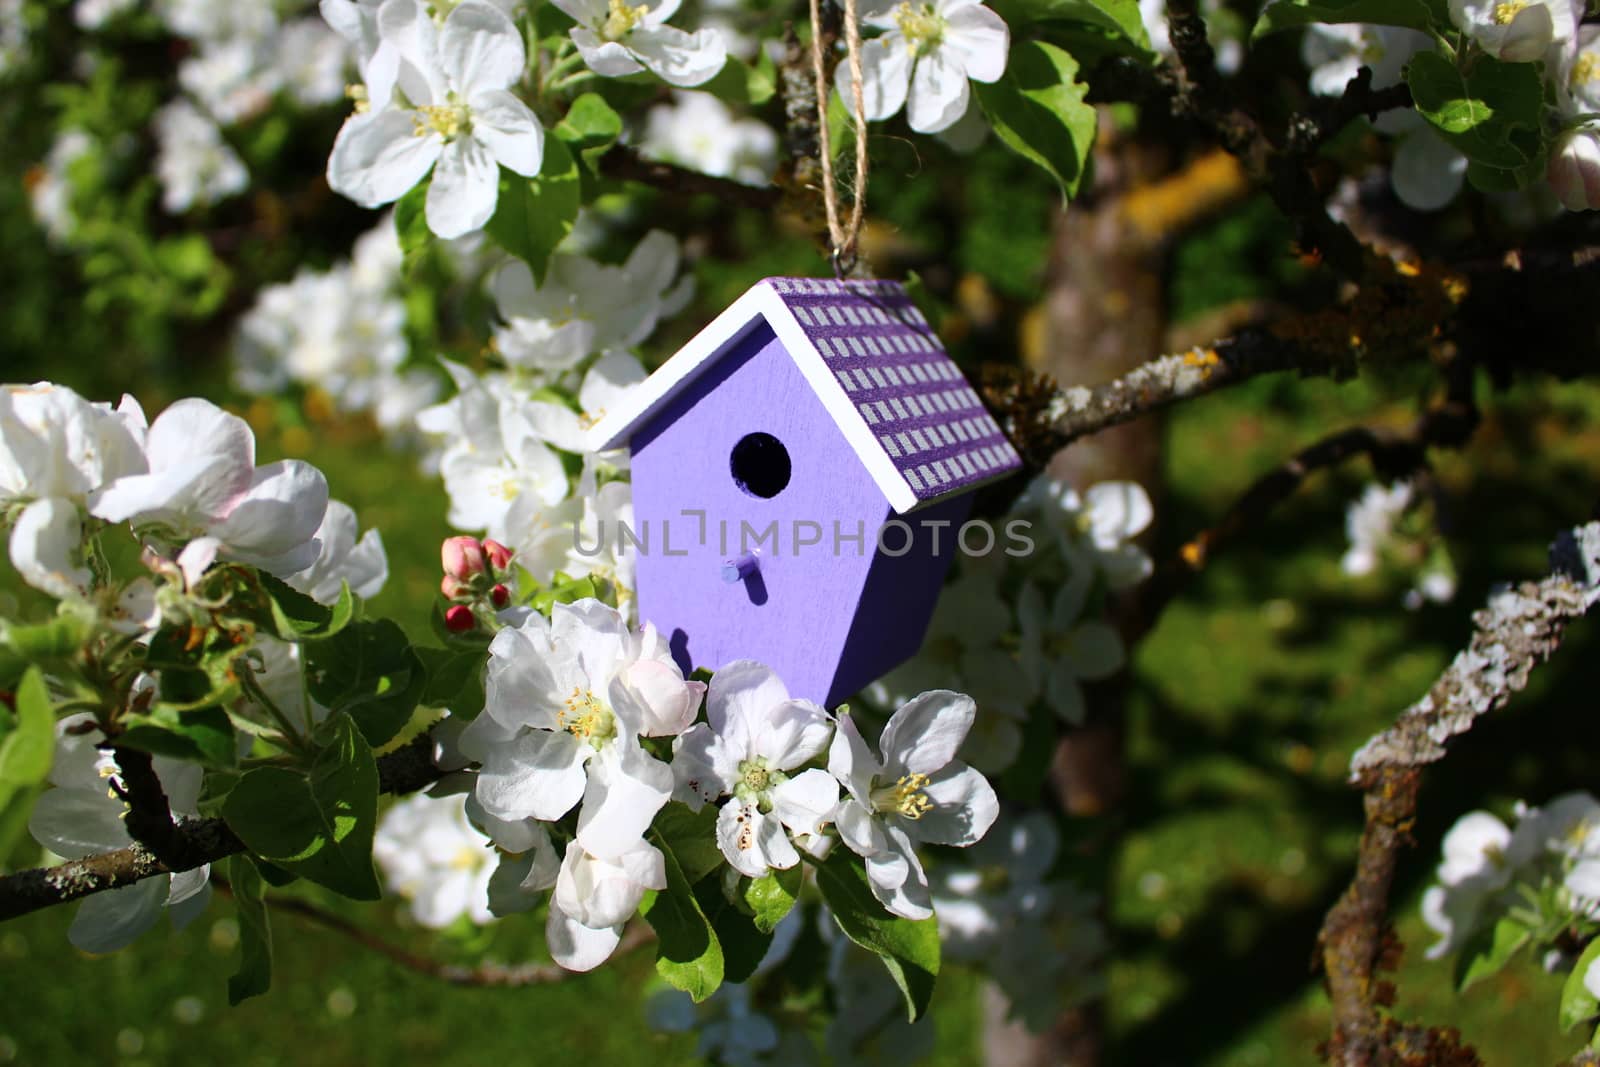 birdhouse in a blossoming pear tree by martina_unbehauen